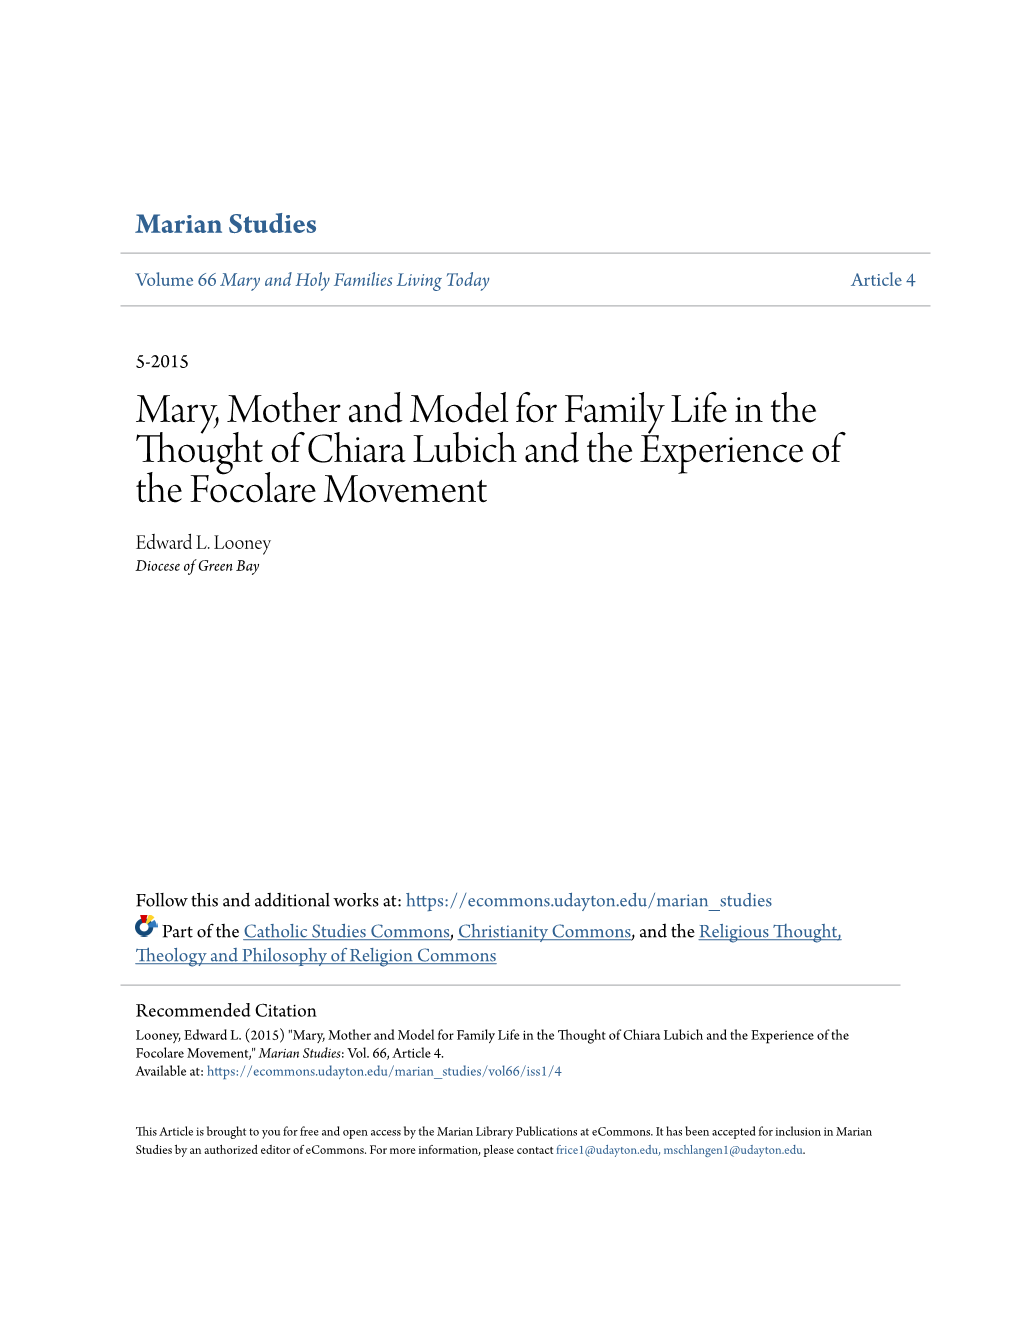 Mary, Mother and Model for Family Life in the Thought of Chiara Lubich and the Experience of the Focolare Movement Edward L